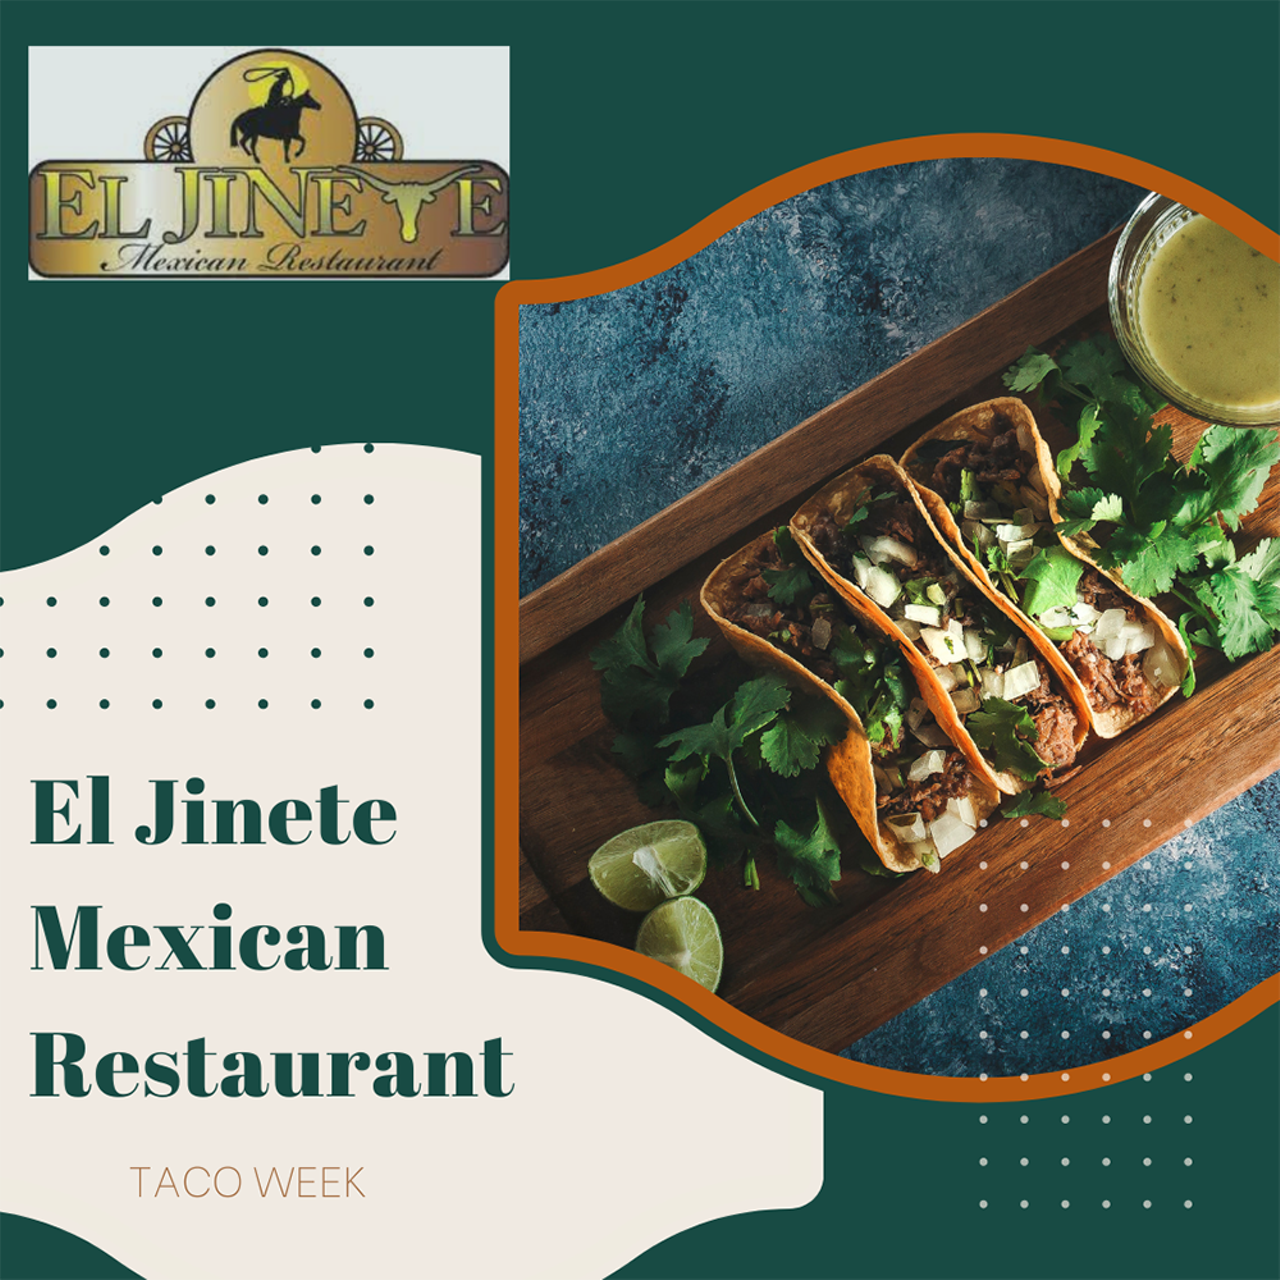 El Jinete Mexican Restaurant
3972 Red Bank Rd., Fairfax; 4111 Webster Ave., Deer Park; 10780 Montgomery Rd., Montgomery
Taco Doblado: Here we have a classic steak taco on a soft shell corn tortilla that has several ingredients, such as onion, cilantro, pico de gallo, corn and cheese.